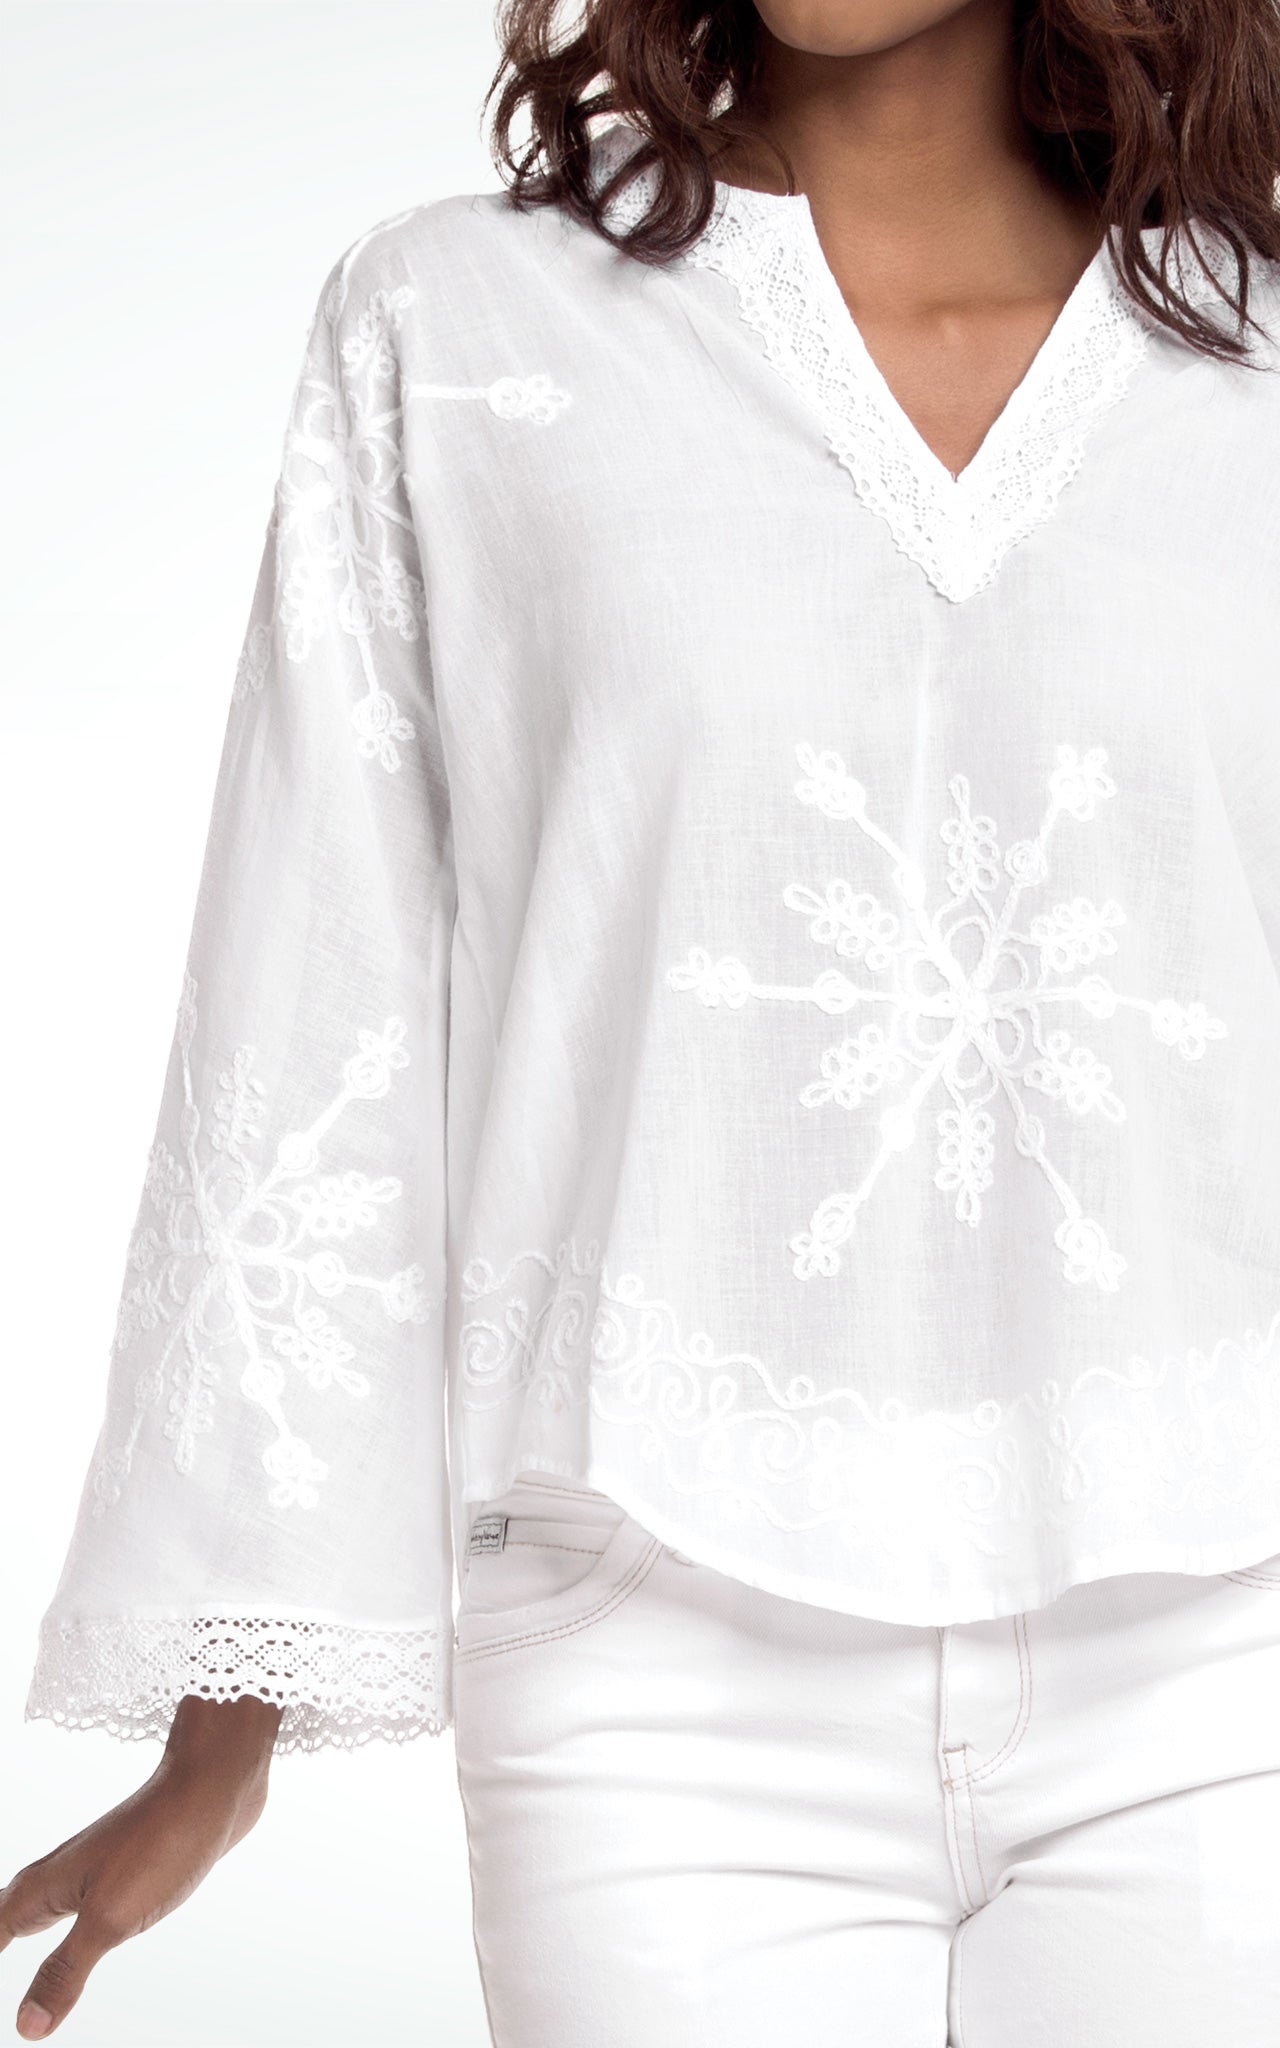 Closer View of Women's Embroidered Long Sleeves Cotton Top